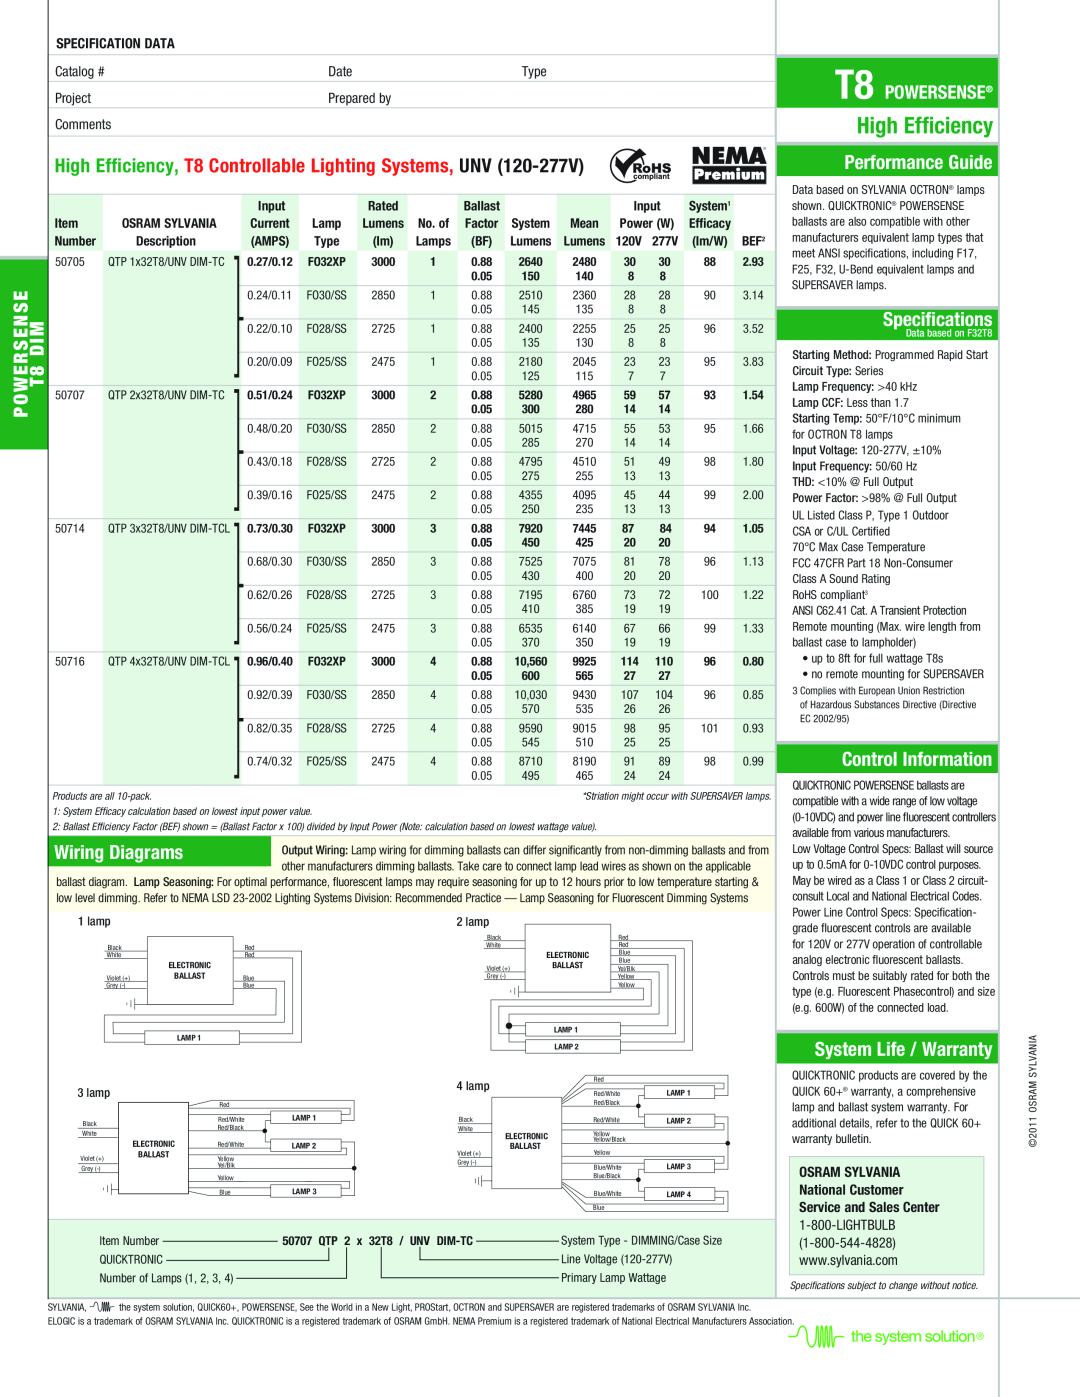 Sylvania Wiring Diagrams, Performance Guide, Specifications, Control Information, System Life / Warranty, T8 POWERSENSE 